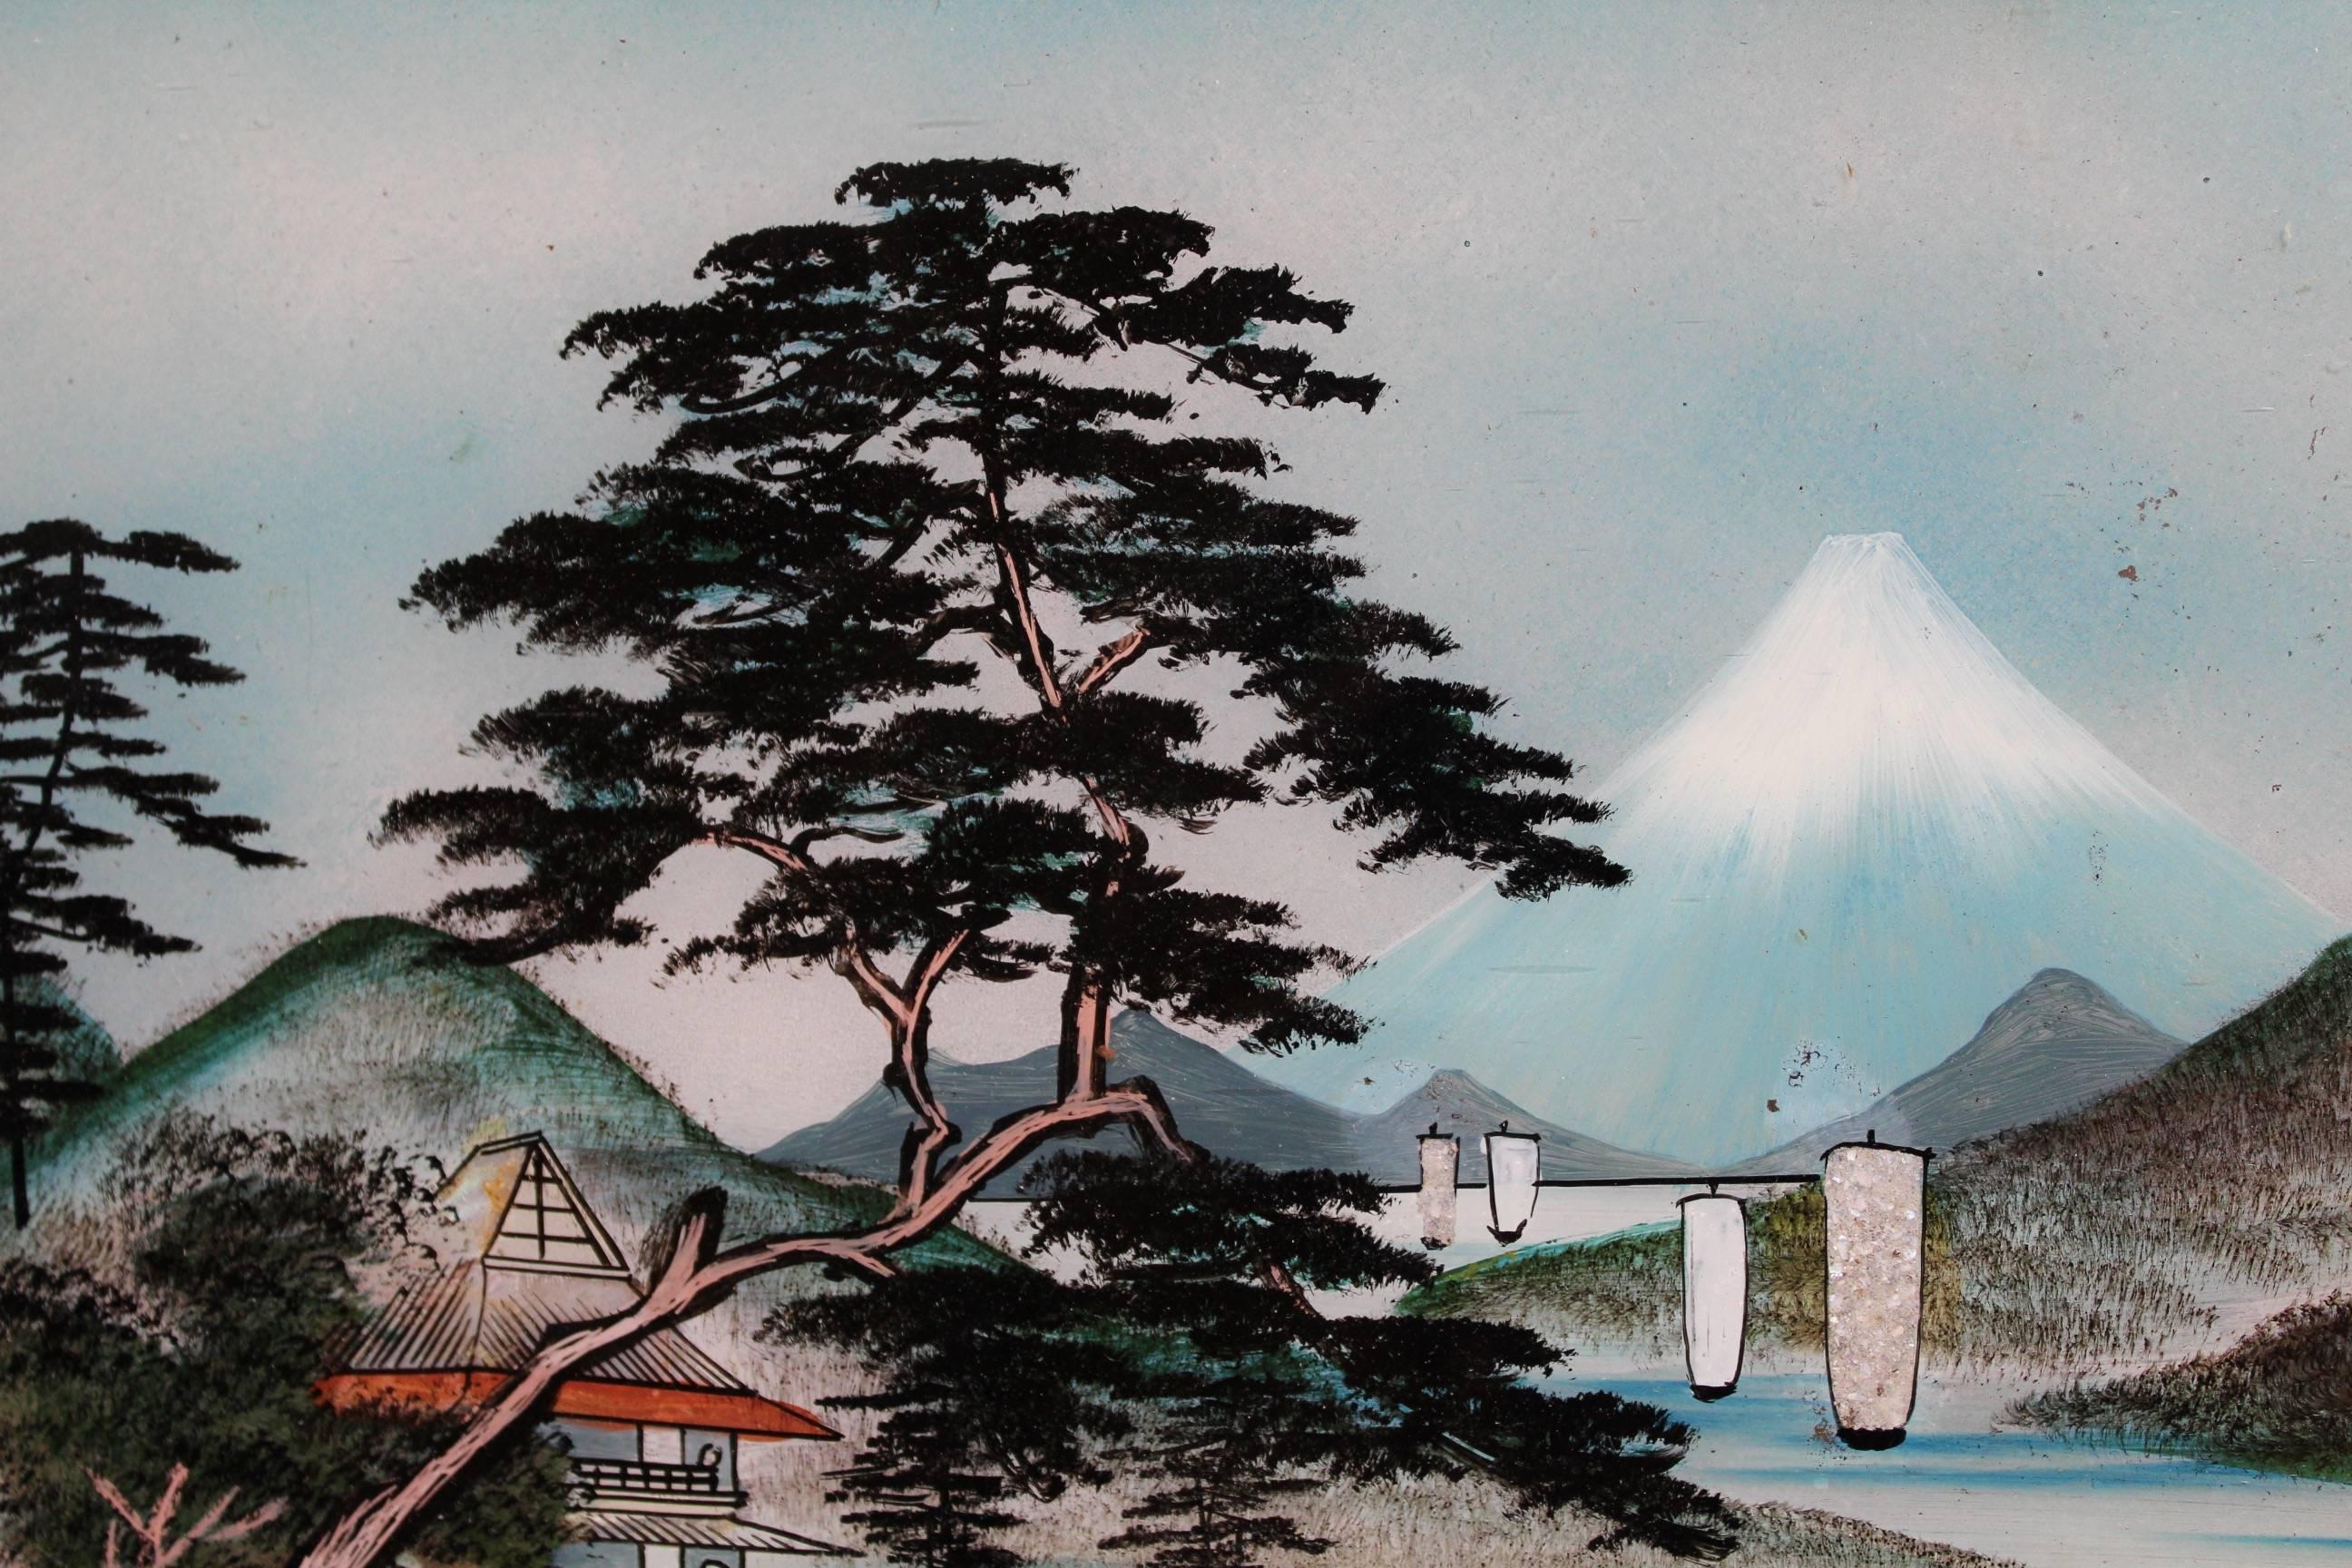 Fine early 20th century pair of Japanese reverse glass painting landscapes featuring each a lake surrounded by hills and houses with high trees. On one of these, the upper right background shows the Mount Fuji, symbol of Japan.
There has been -on